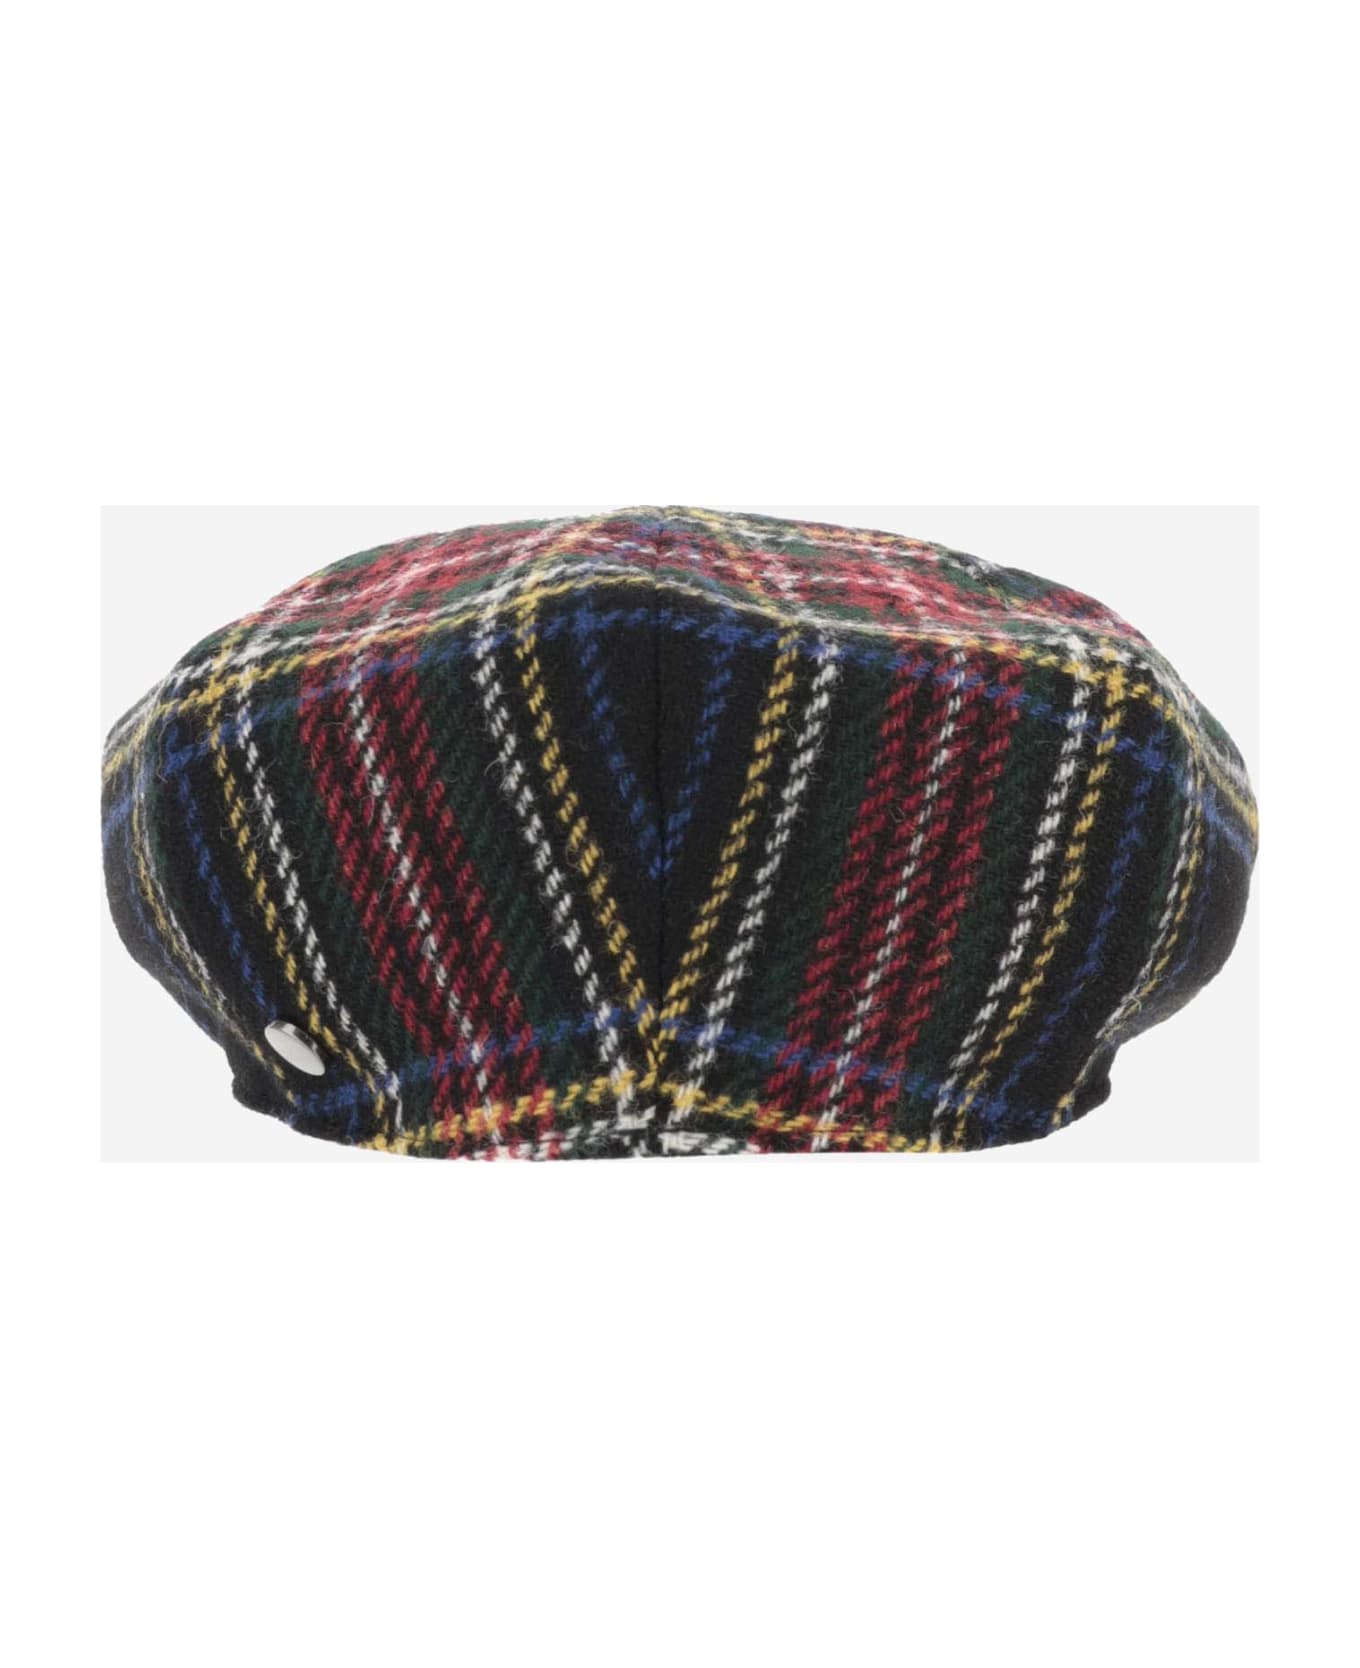 Stetson Wool Cap With Check Pattern - GREEN CHECK